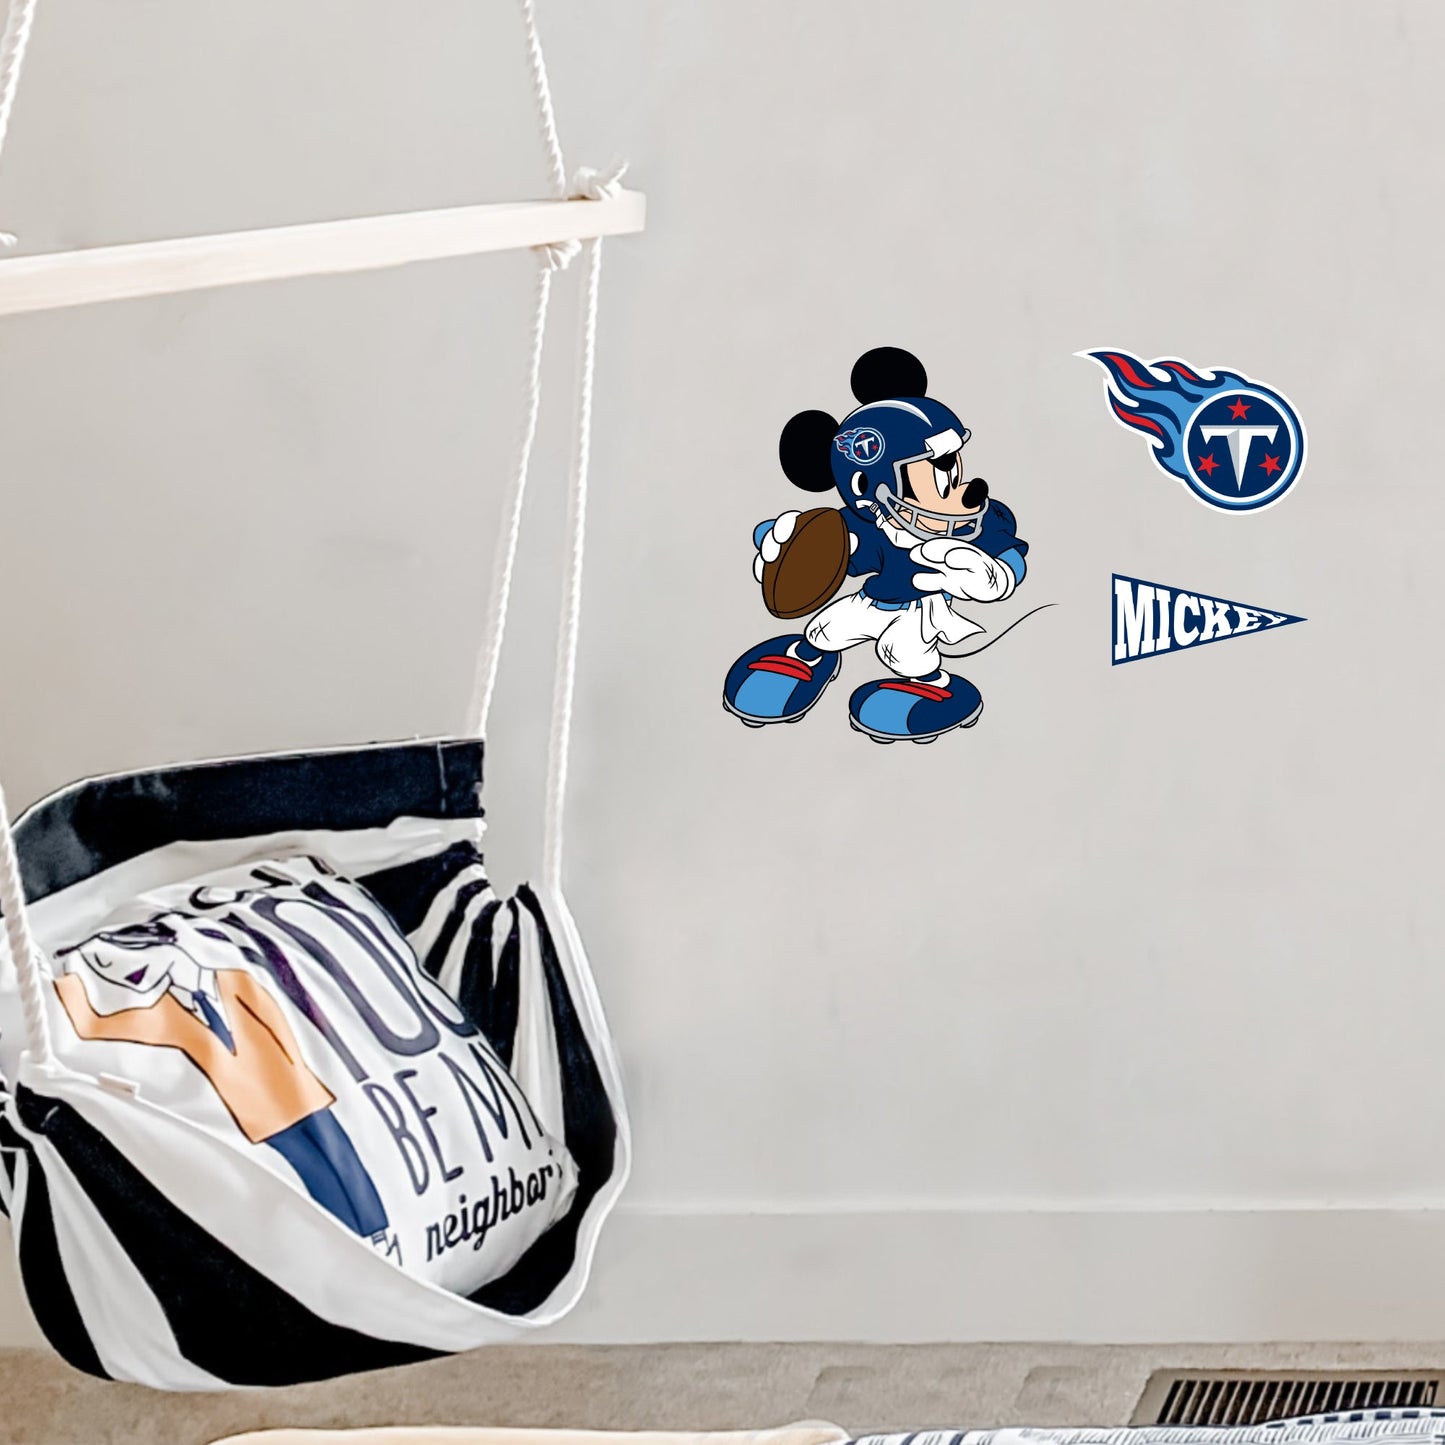 Tennessee Titans: Mickey Mouse - Officially Licensed NFL Removable Adhesive Decal